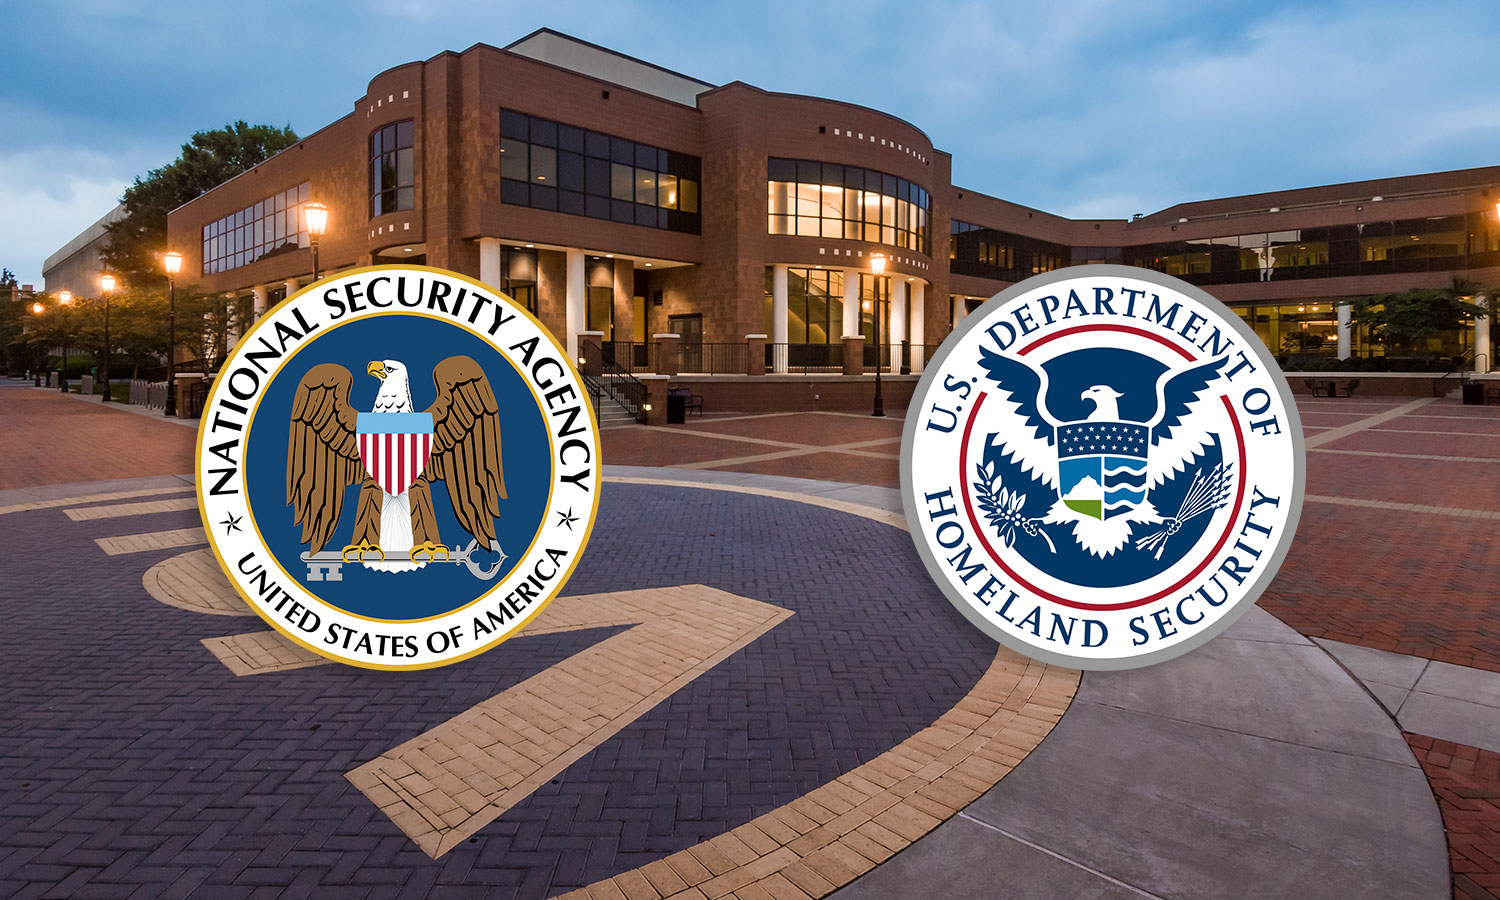 NSA and DHS logo on top of an image of VCU building